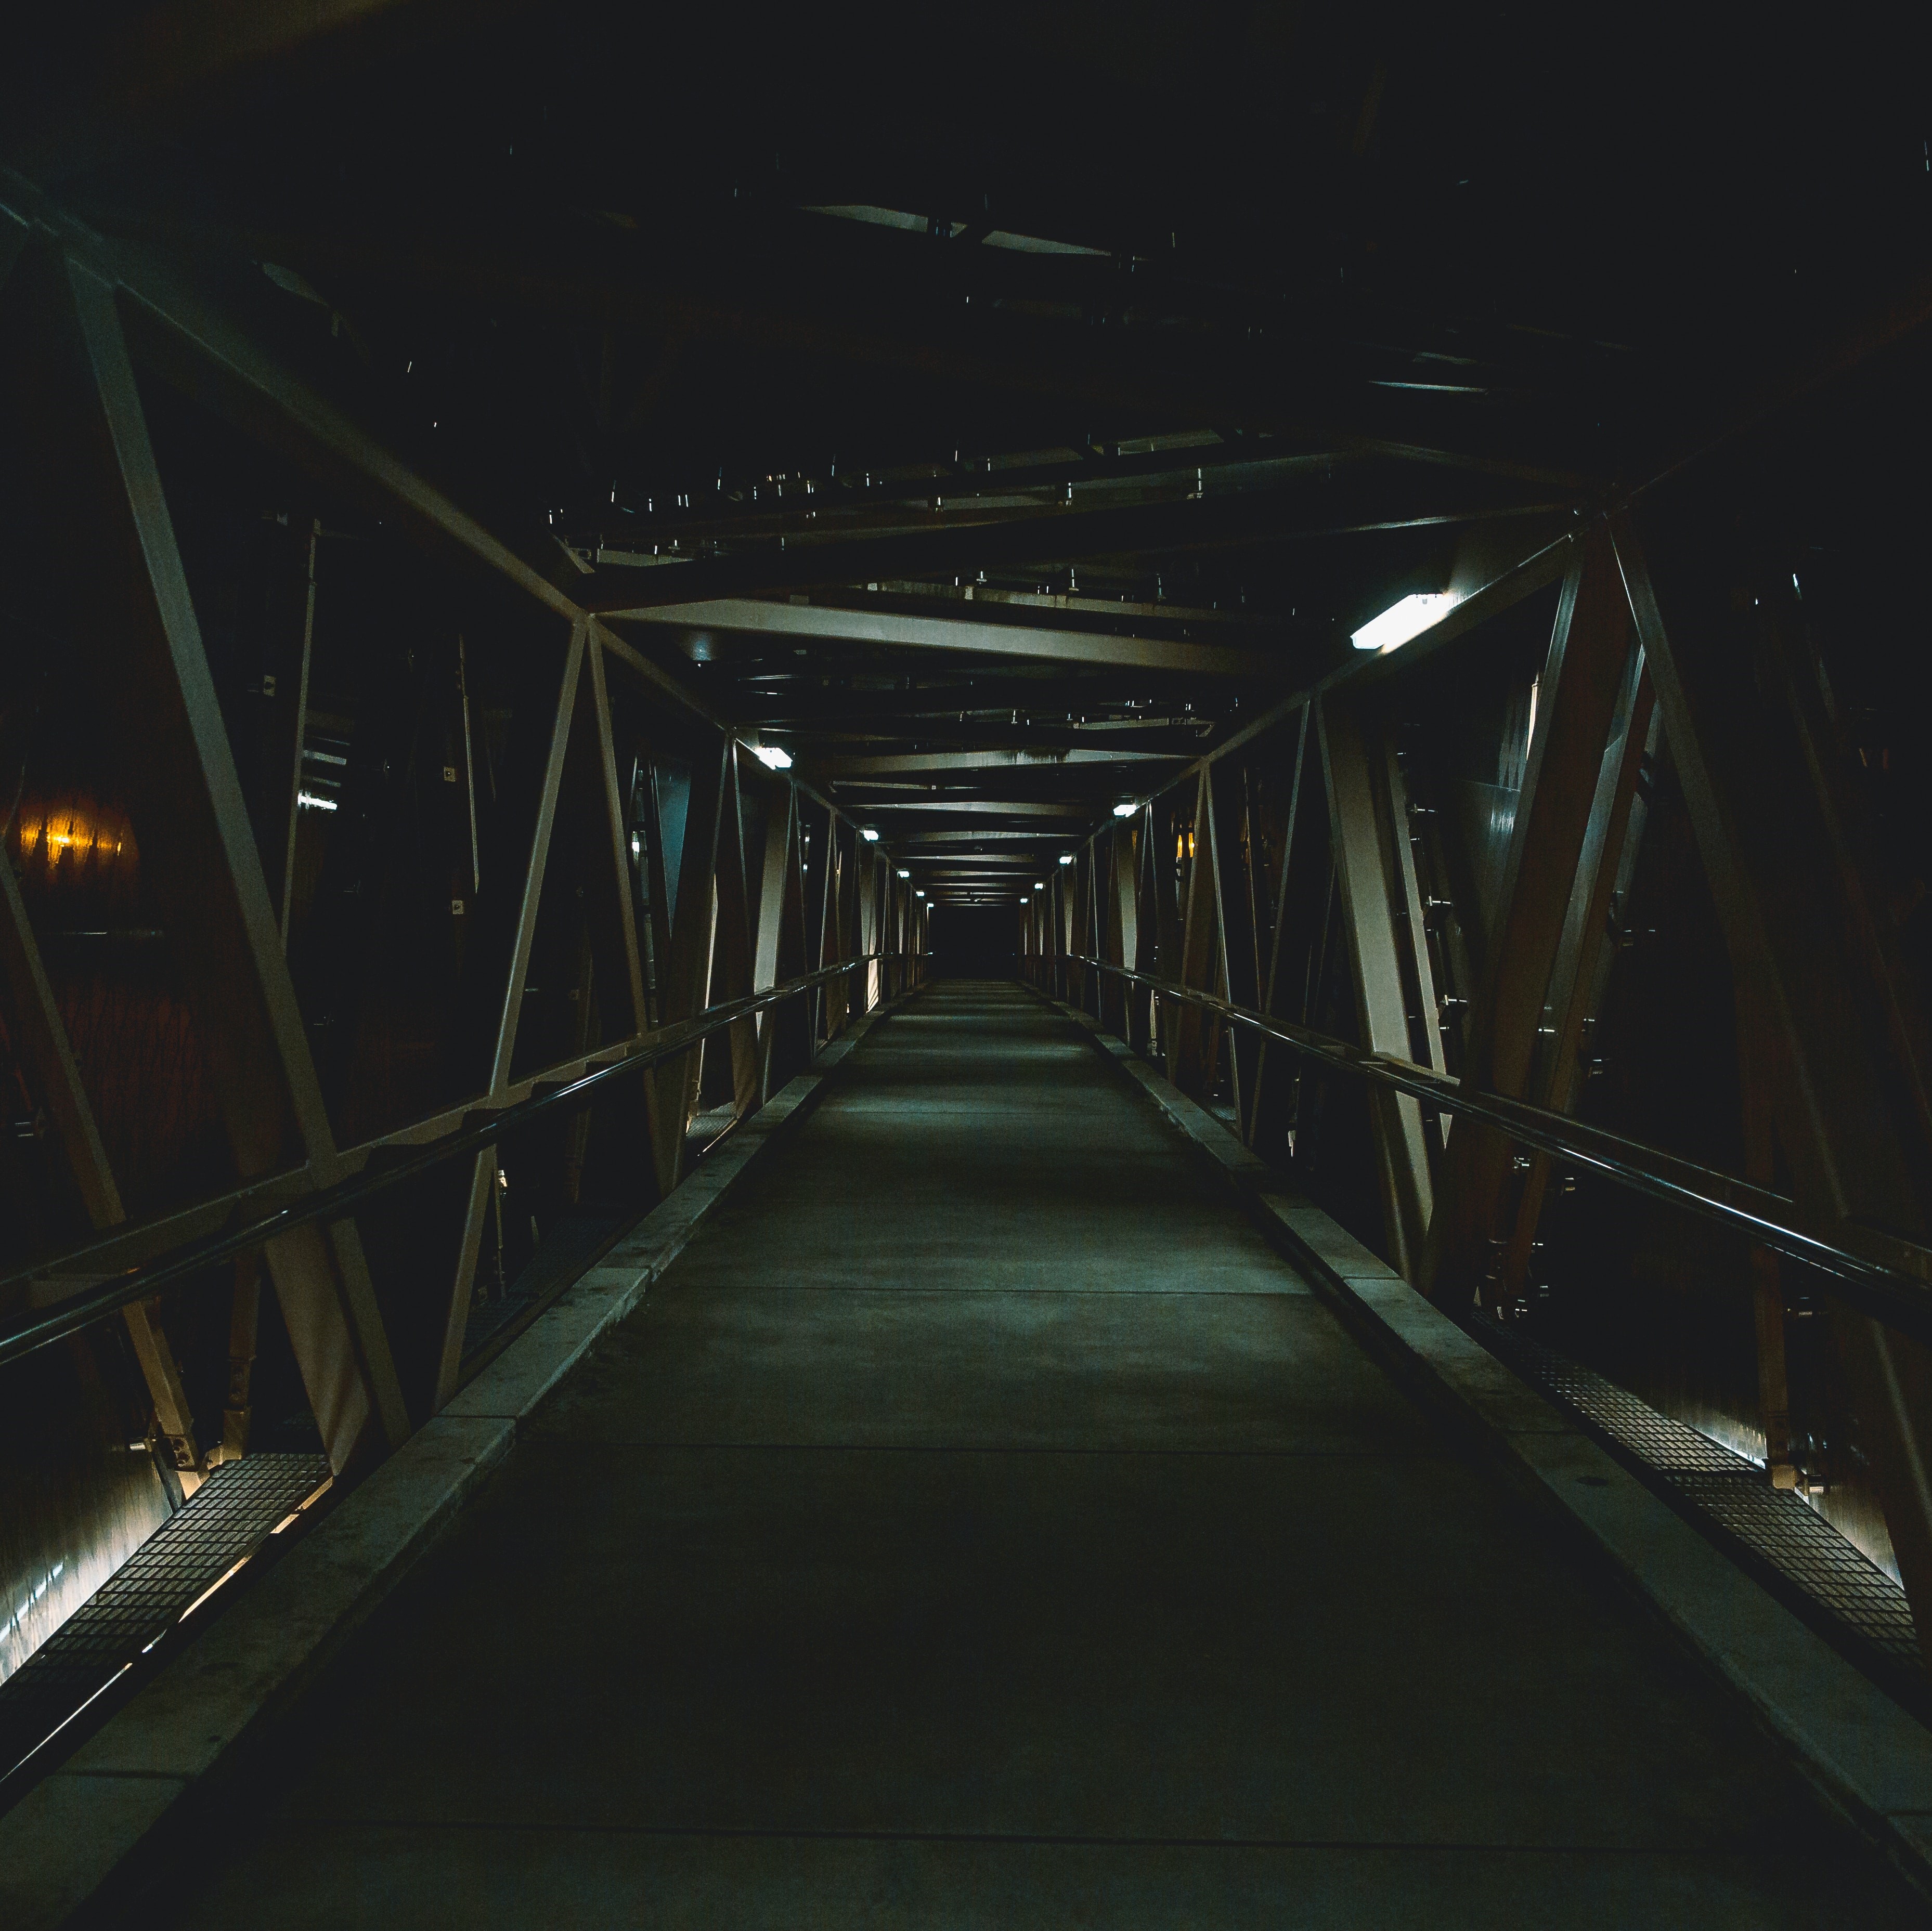 A dark tunnel covered by metal girders